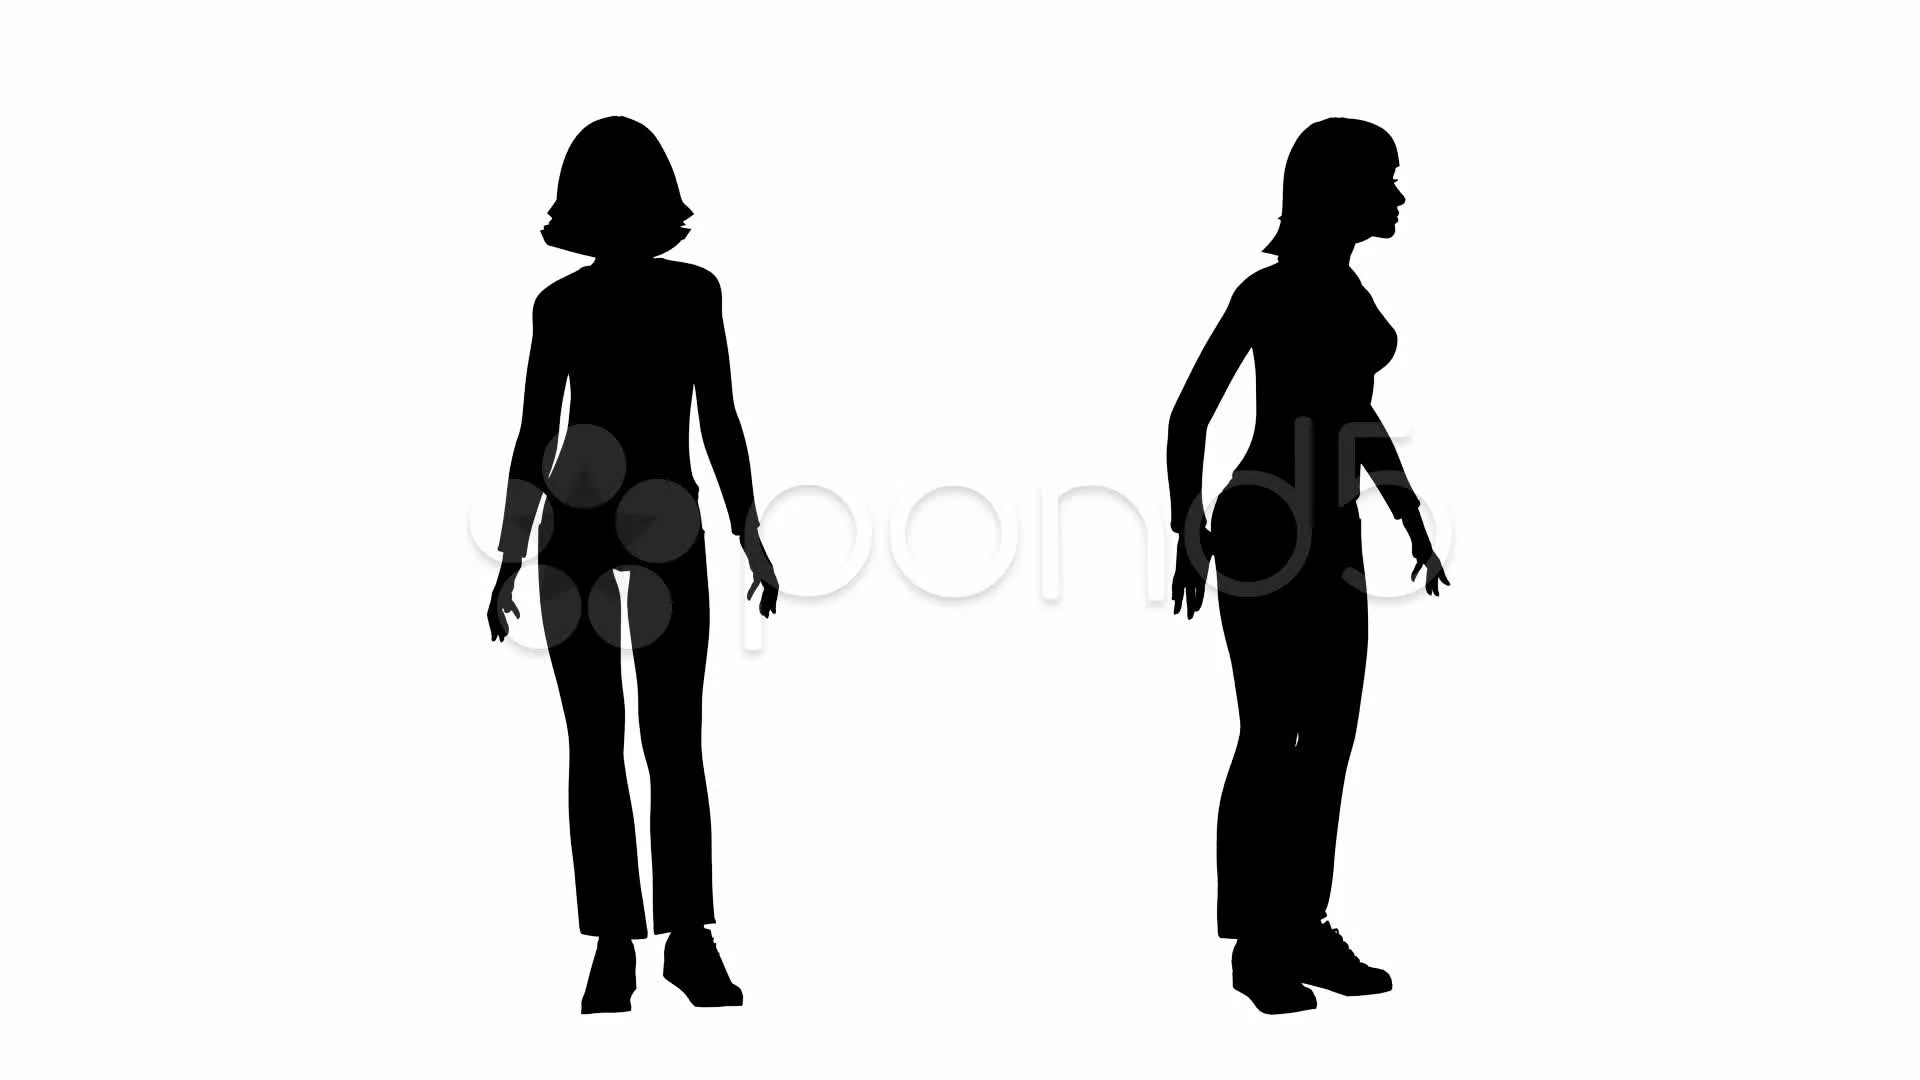 female silhouette standing side